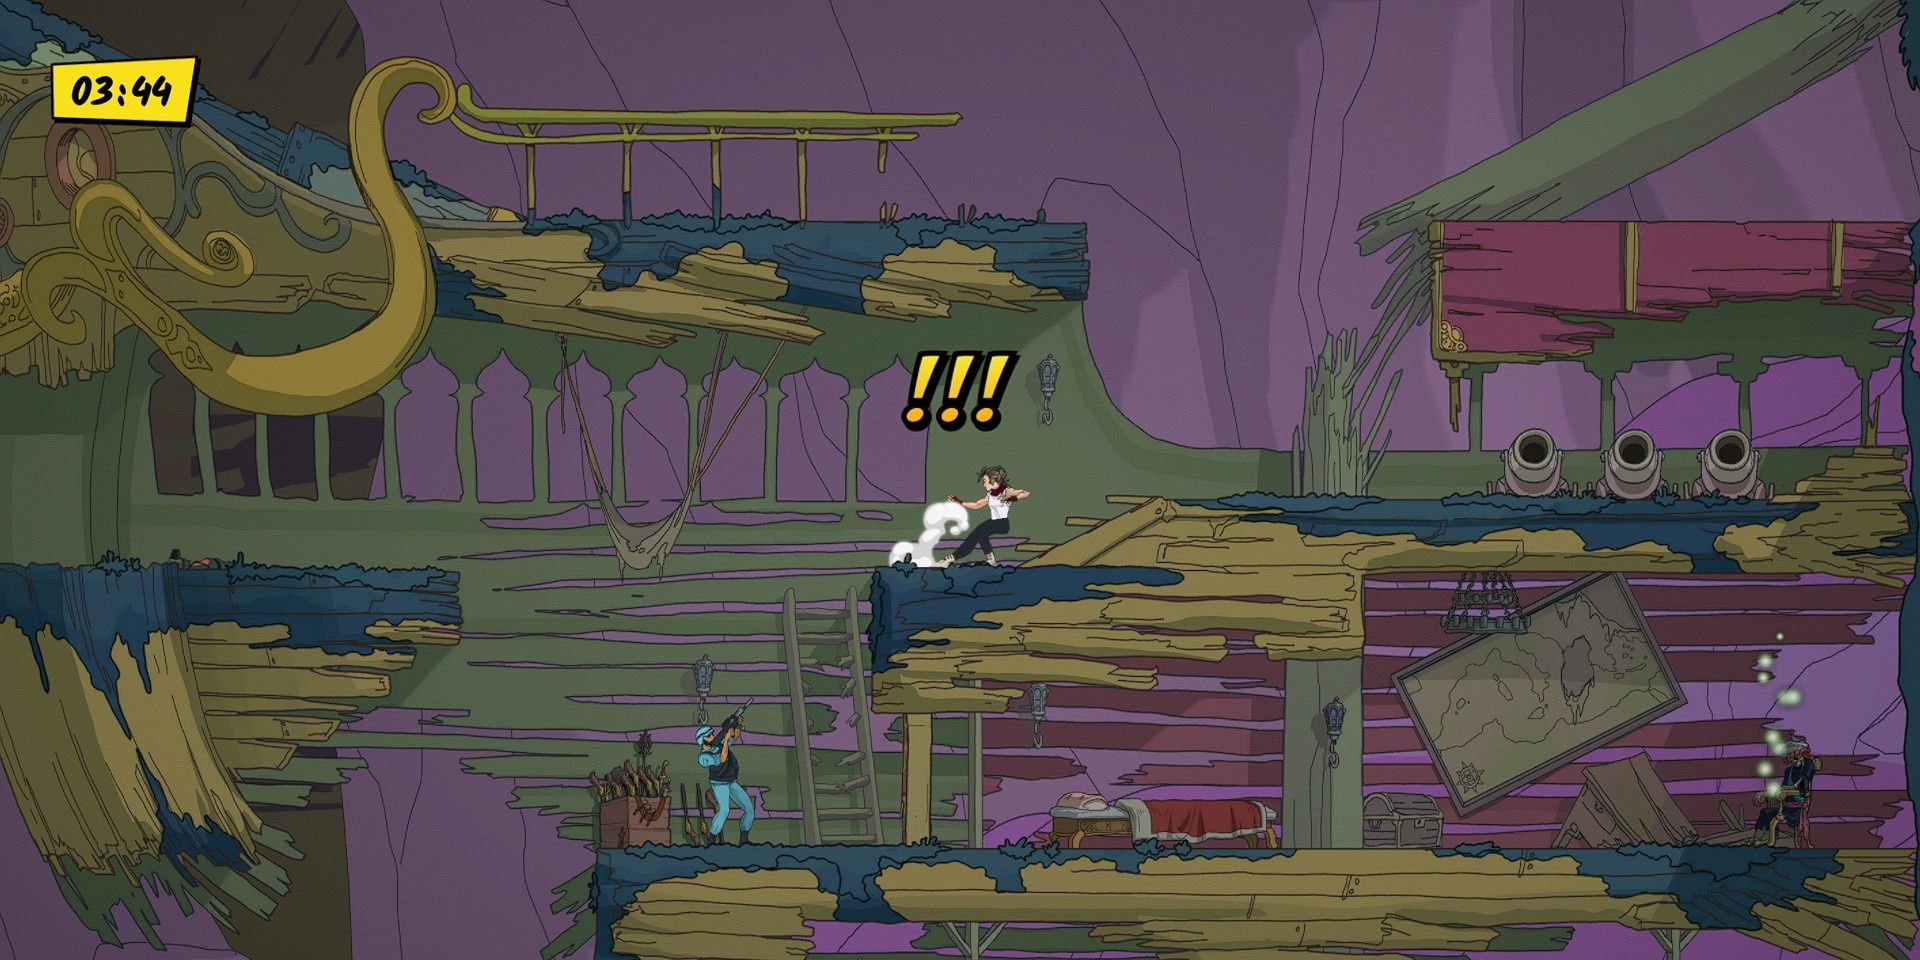 A player dashing across a platform in Treasures of Aegean